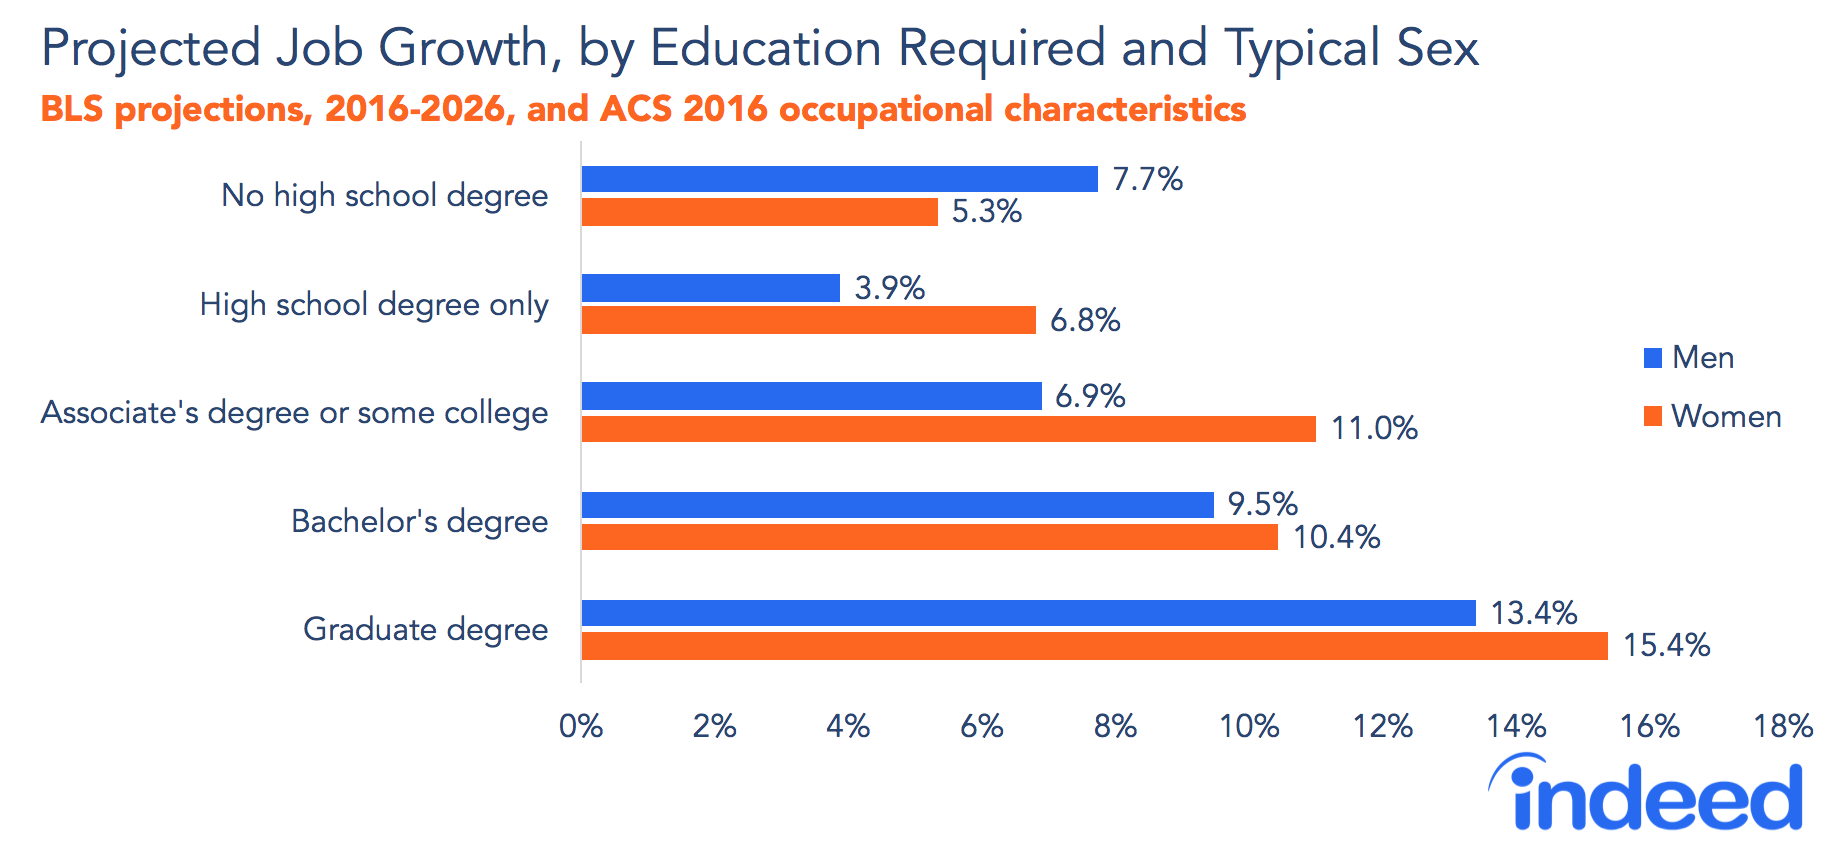 Projected job growth, by education required and typical sex